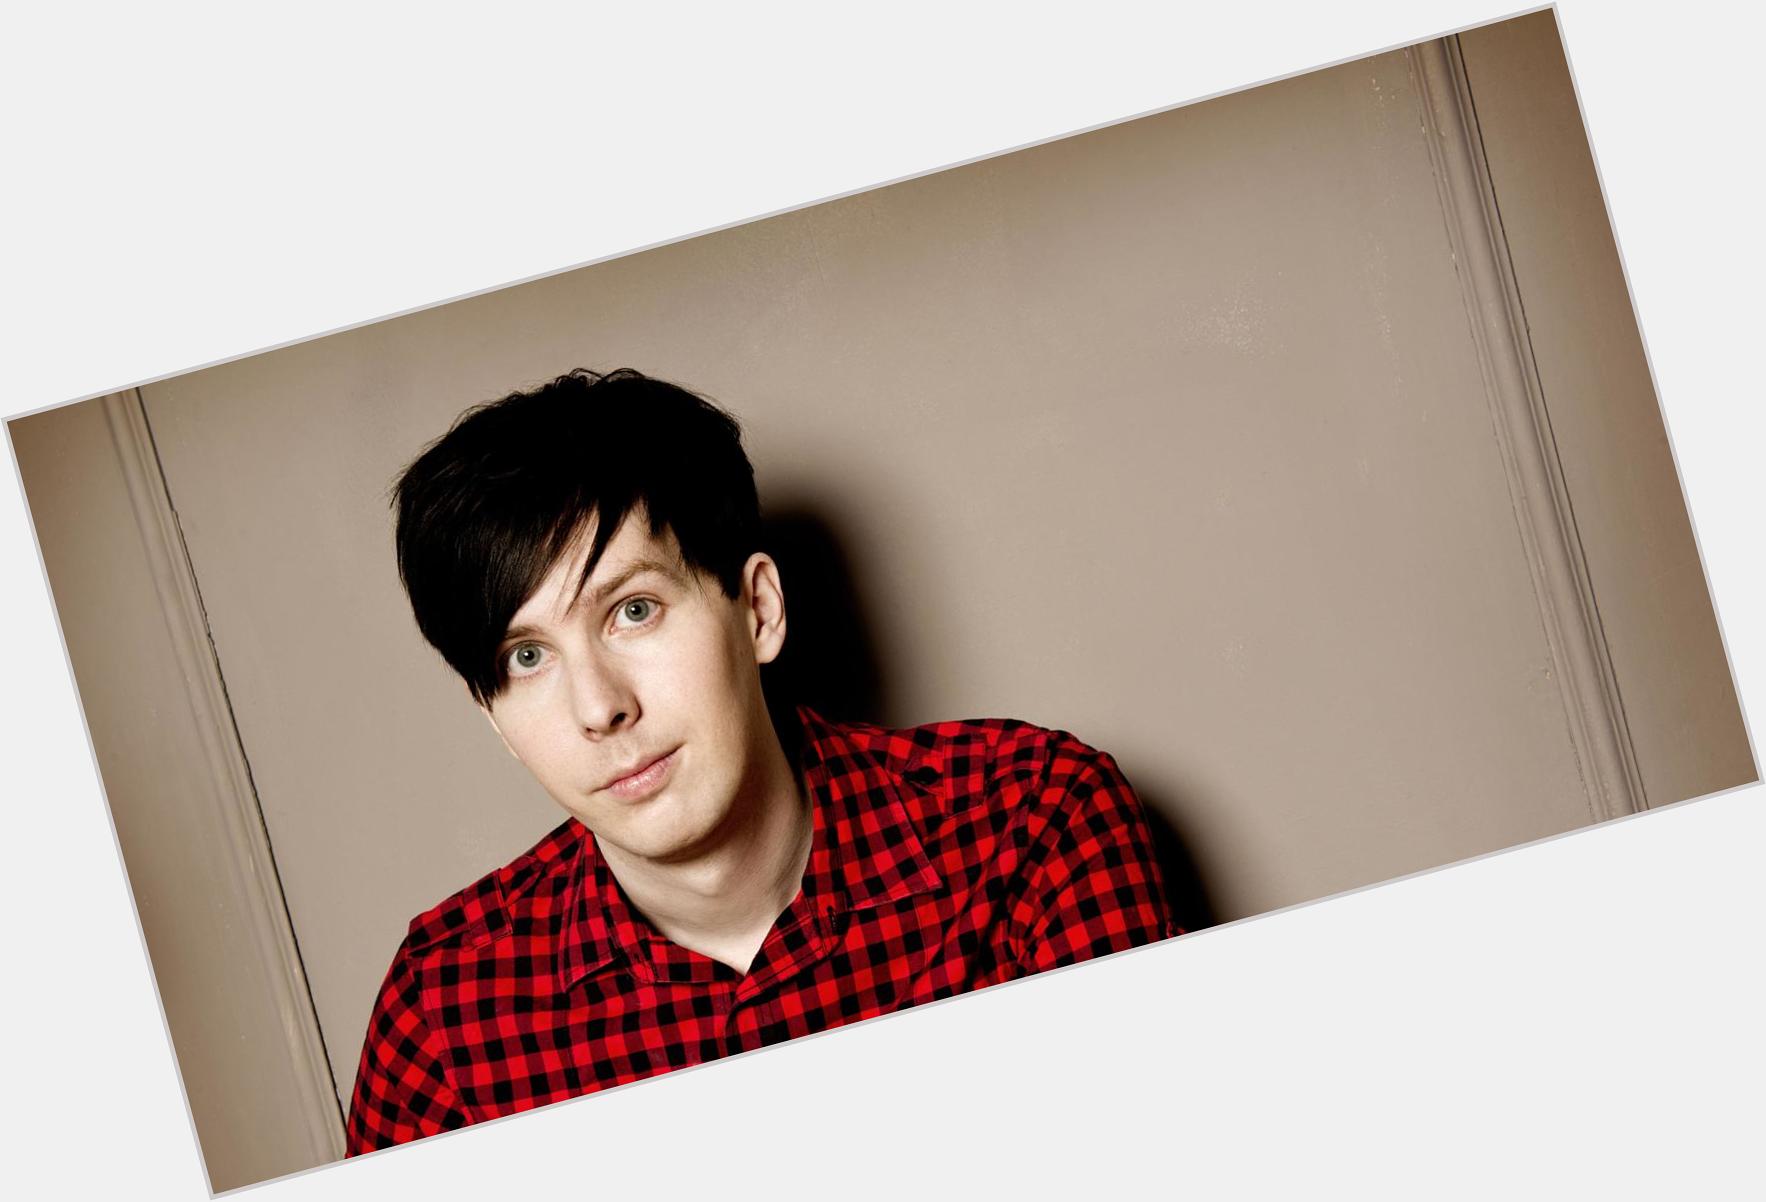 Phil Lester dating 2